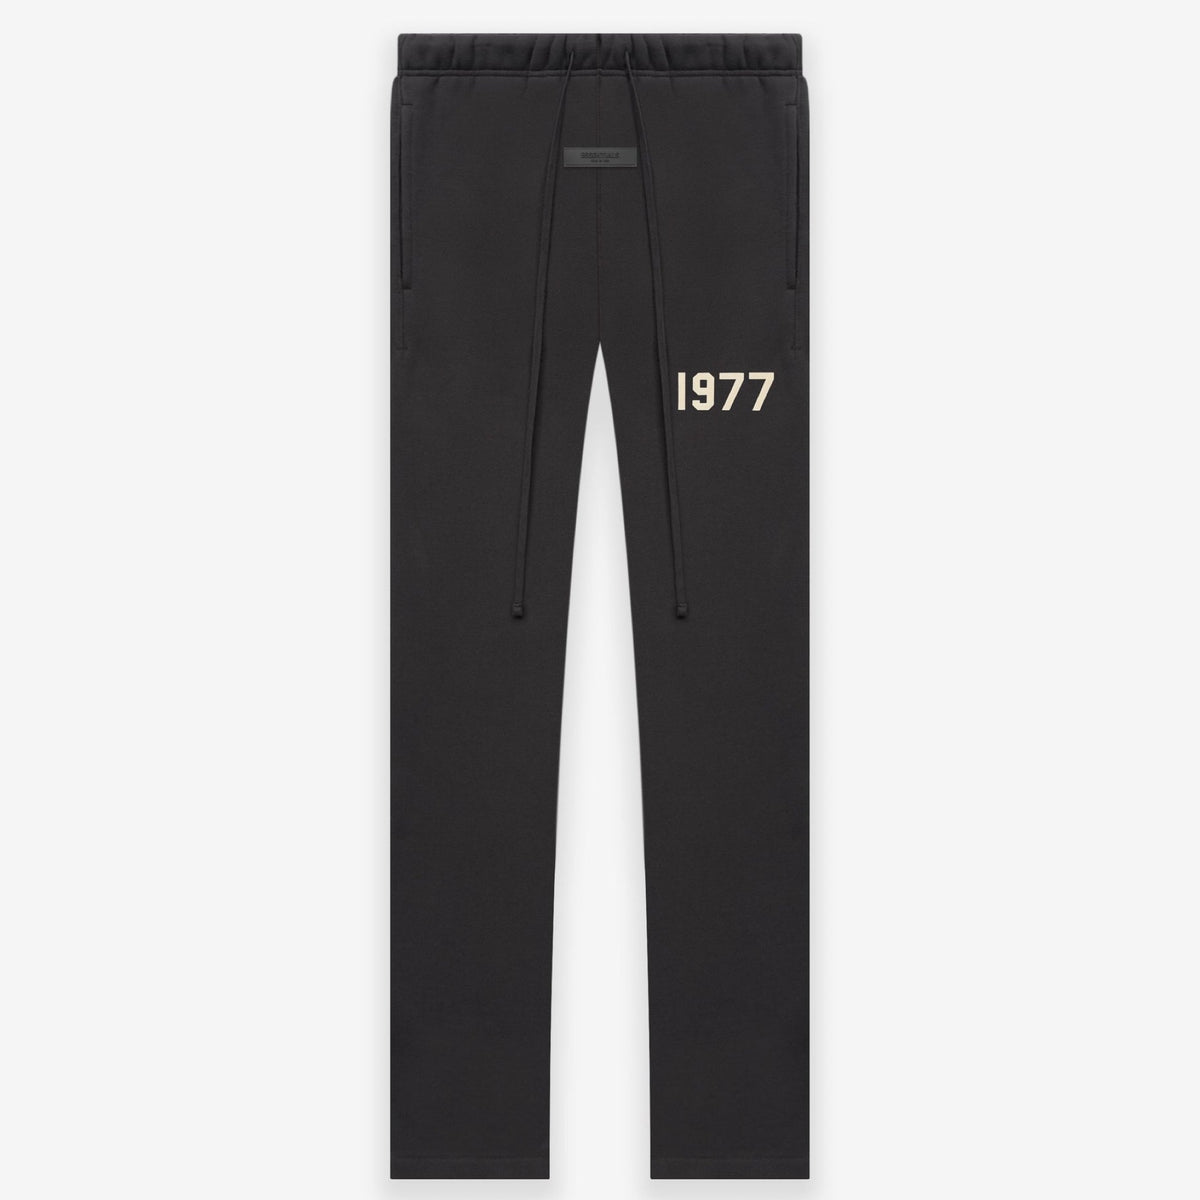 Essentials S22 Iron Relaxed Sweatpants